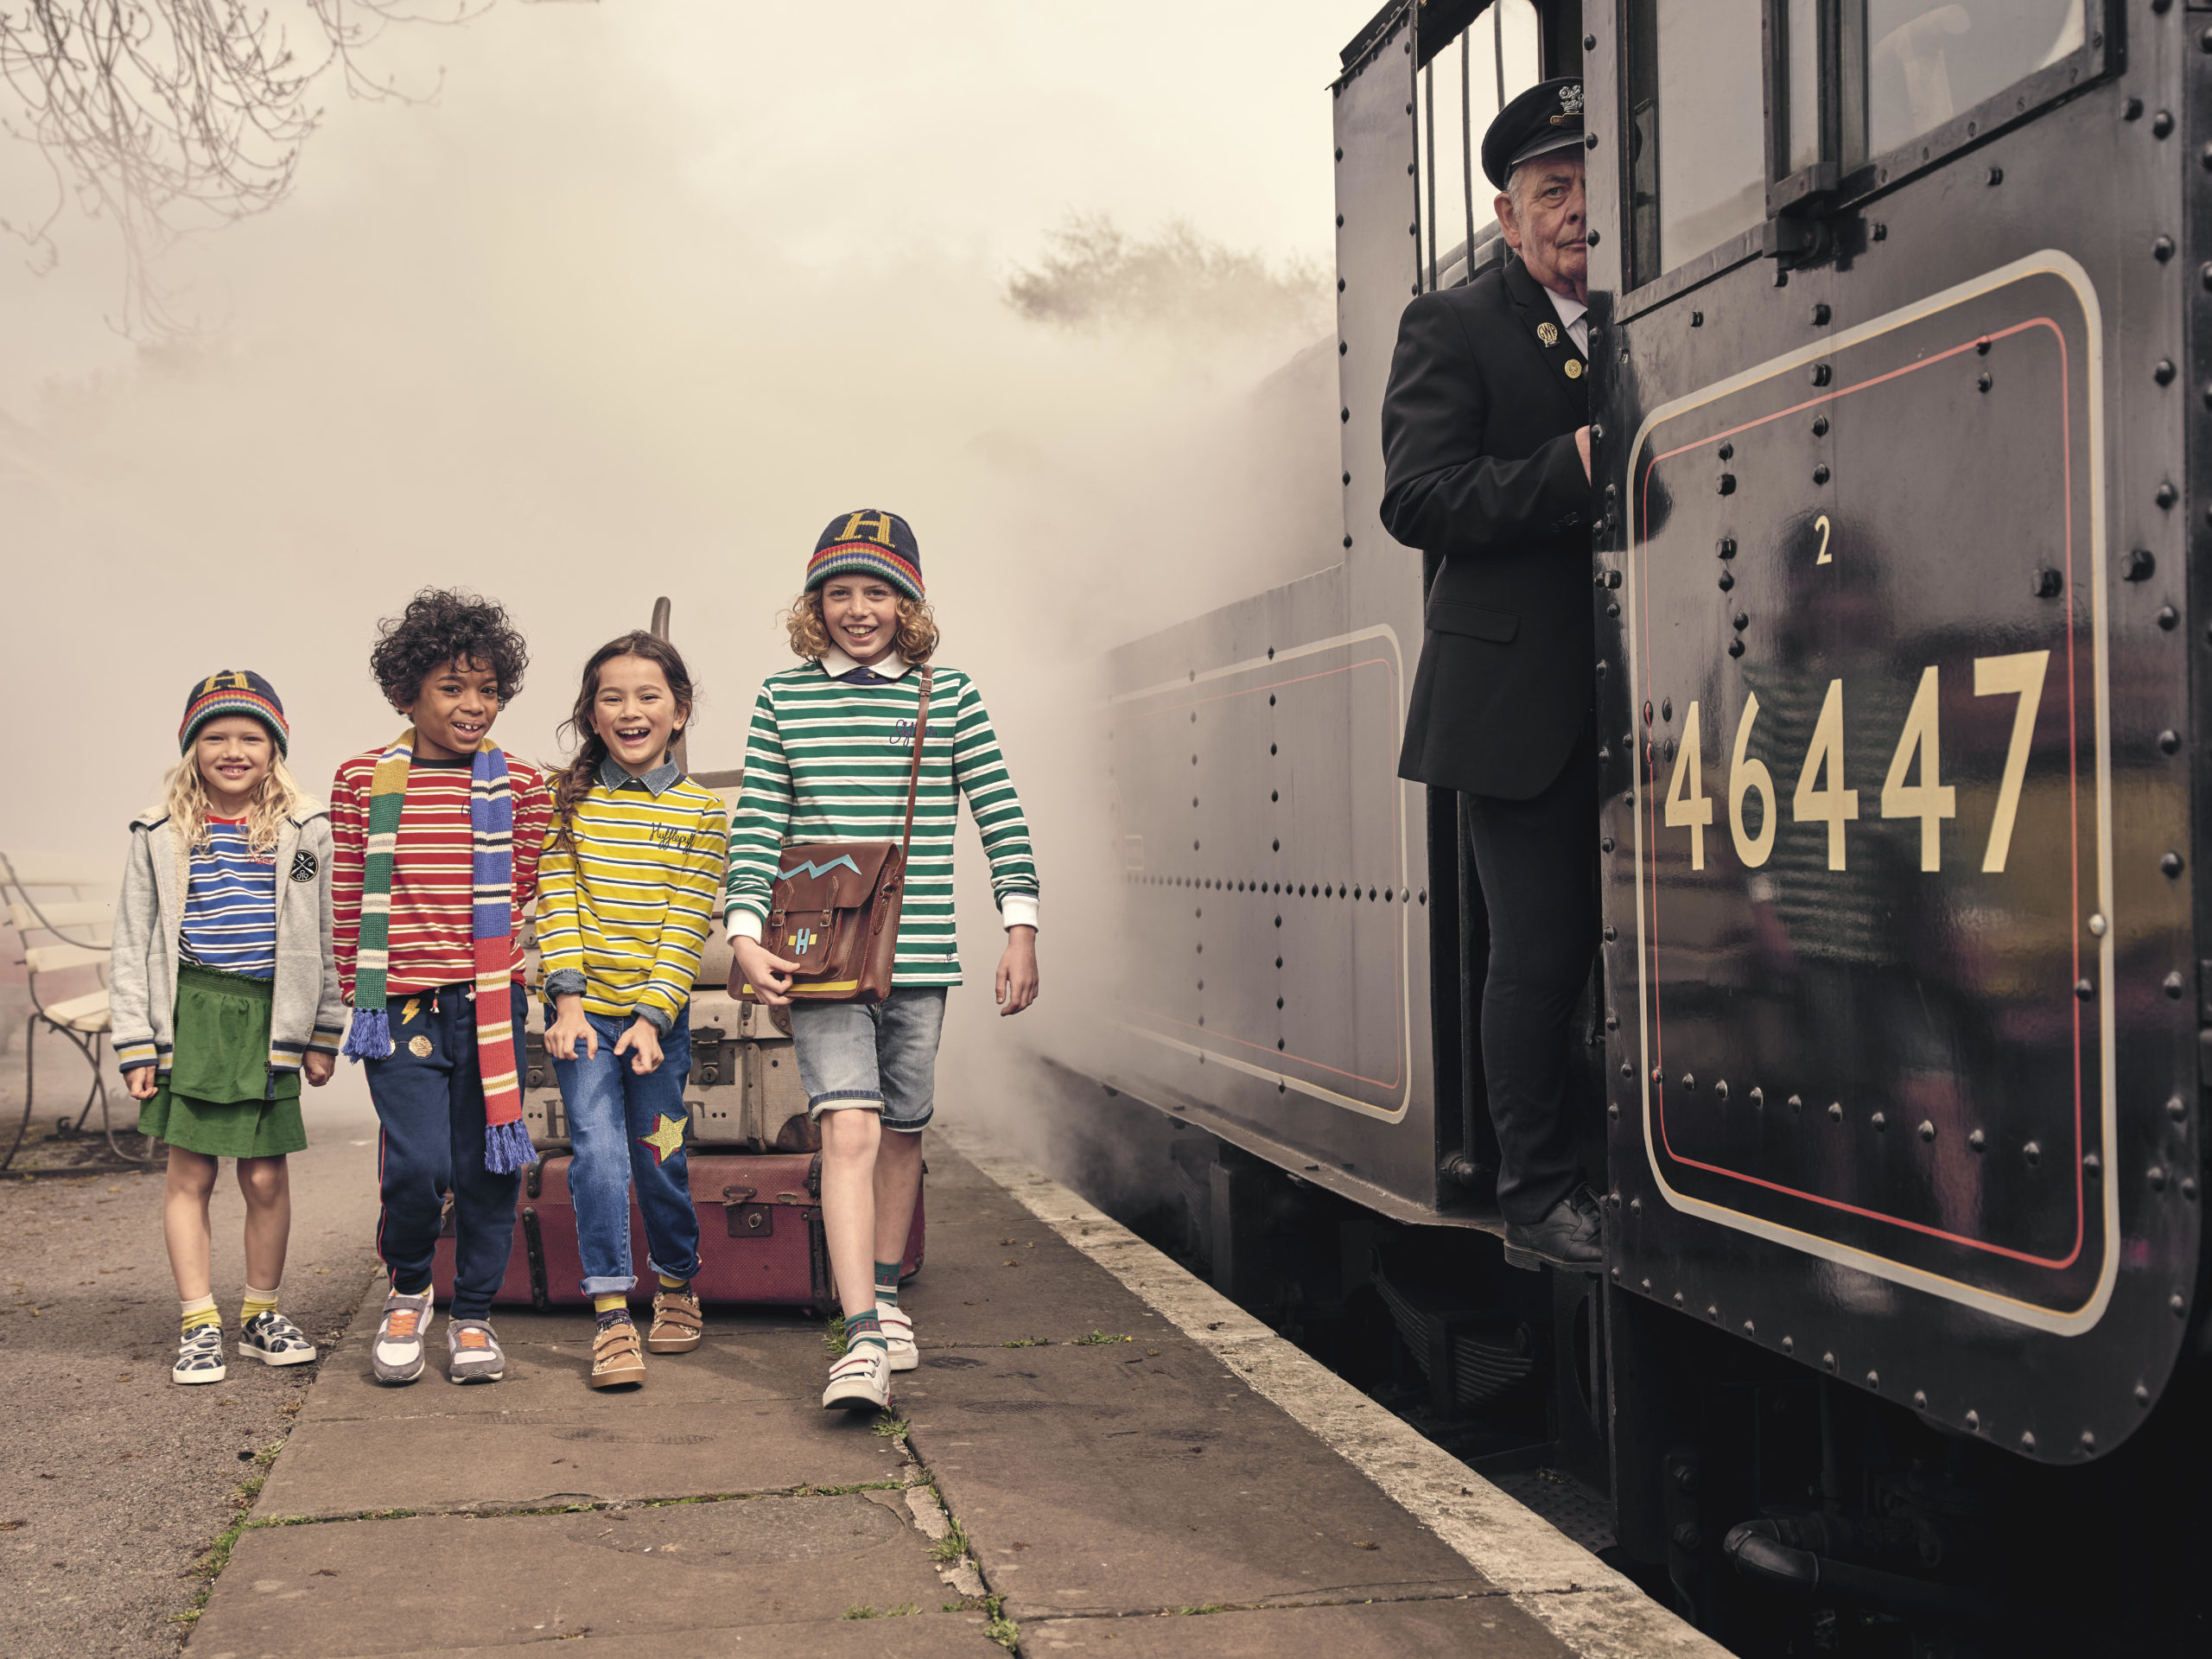 Signature stripes from Mini Boden in the new Harry Potter collaboration for winter 2019